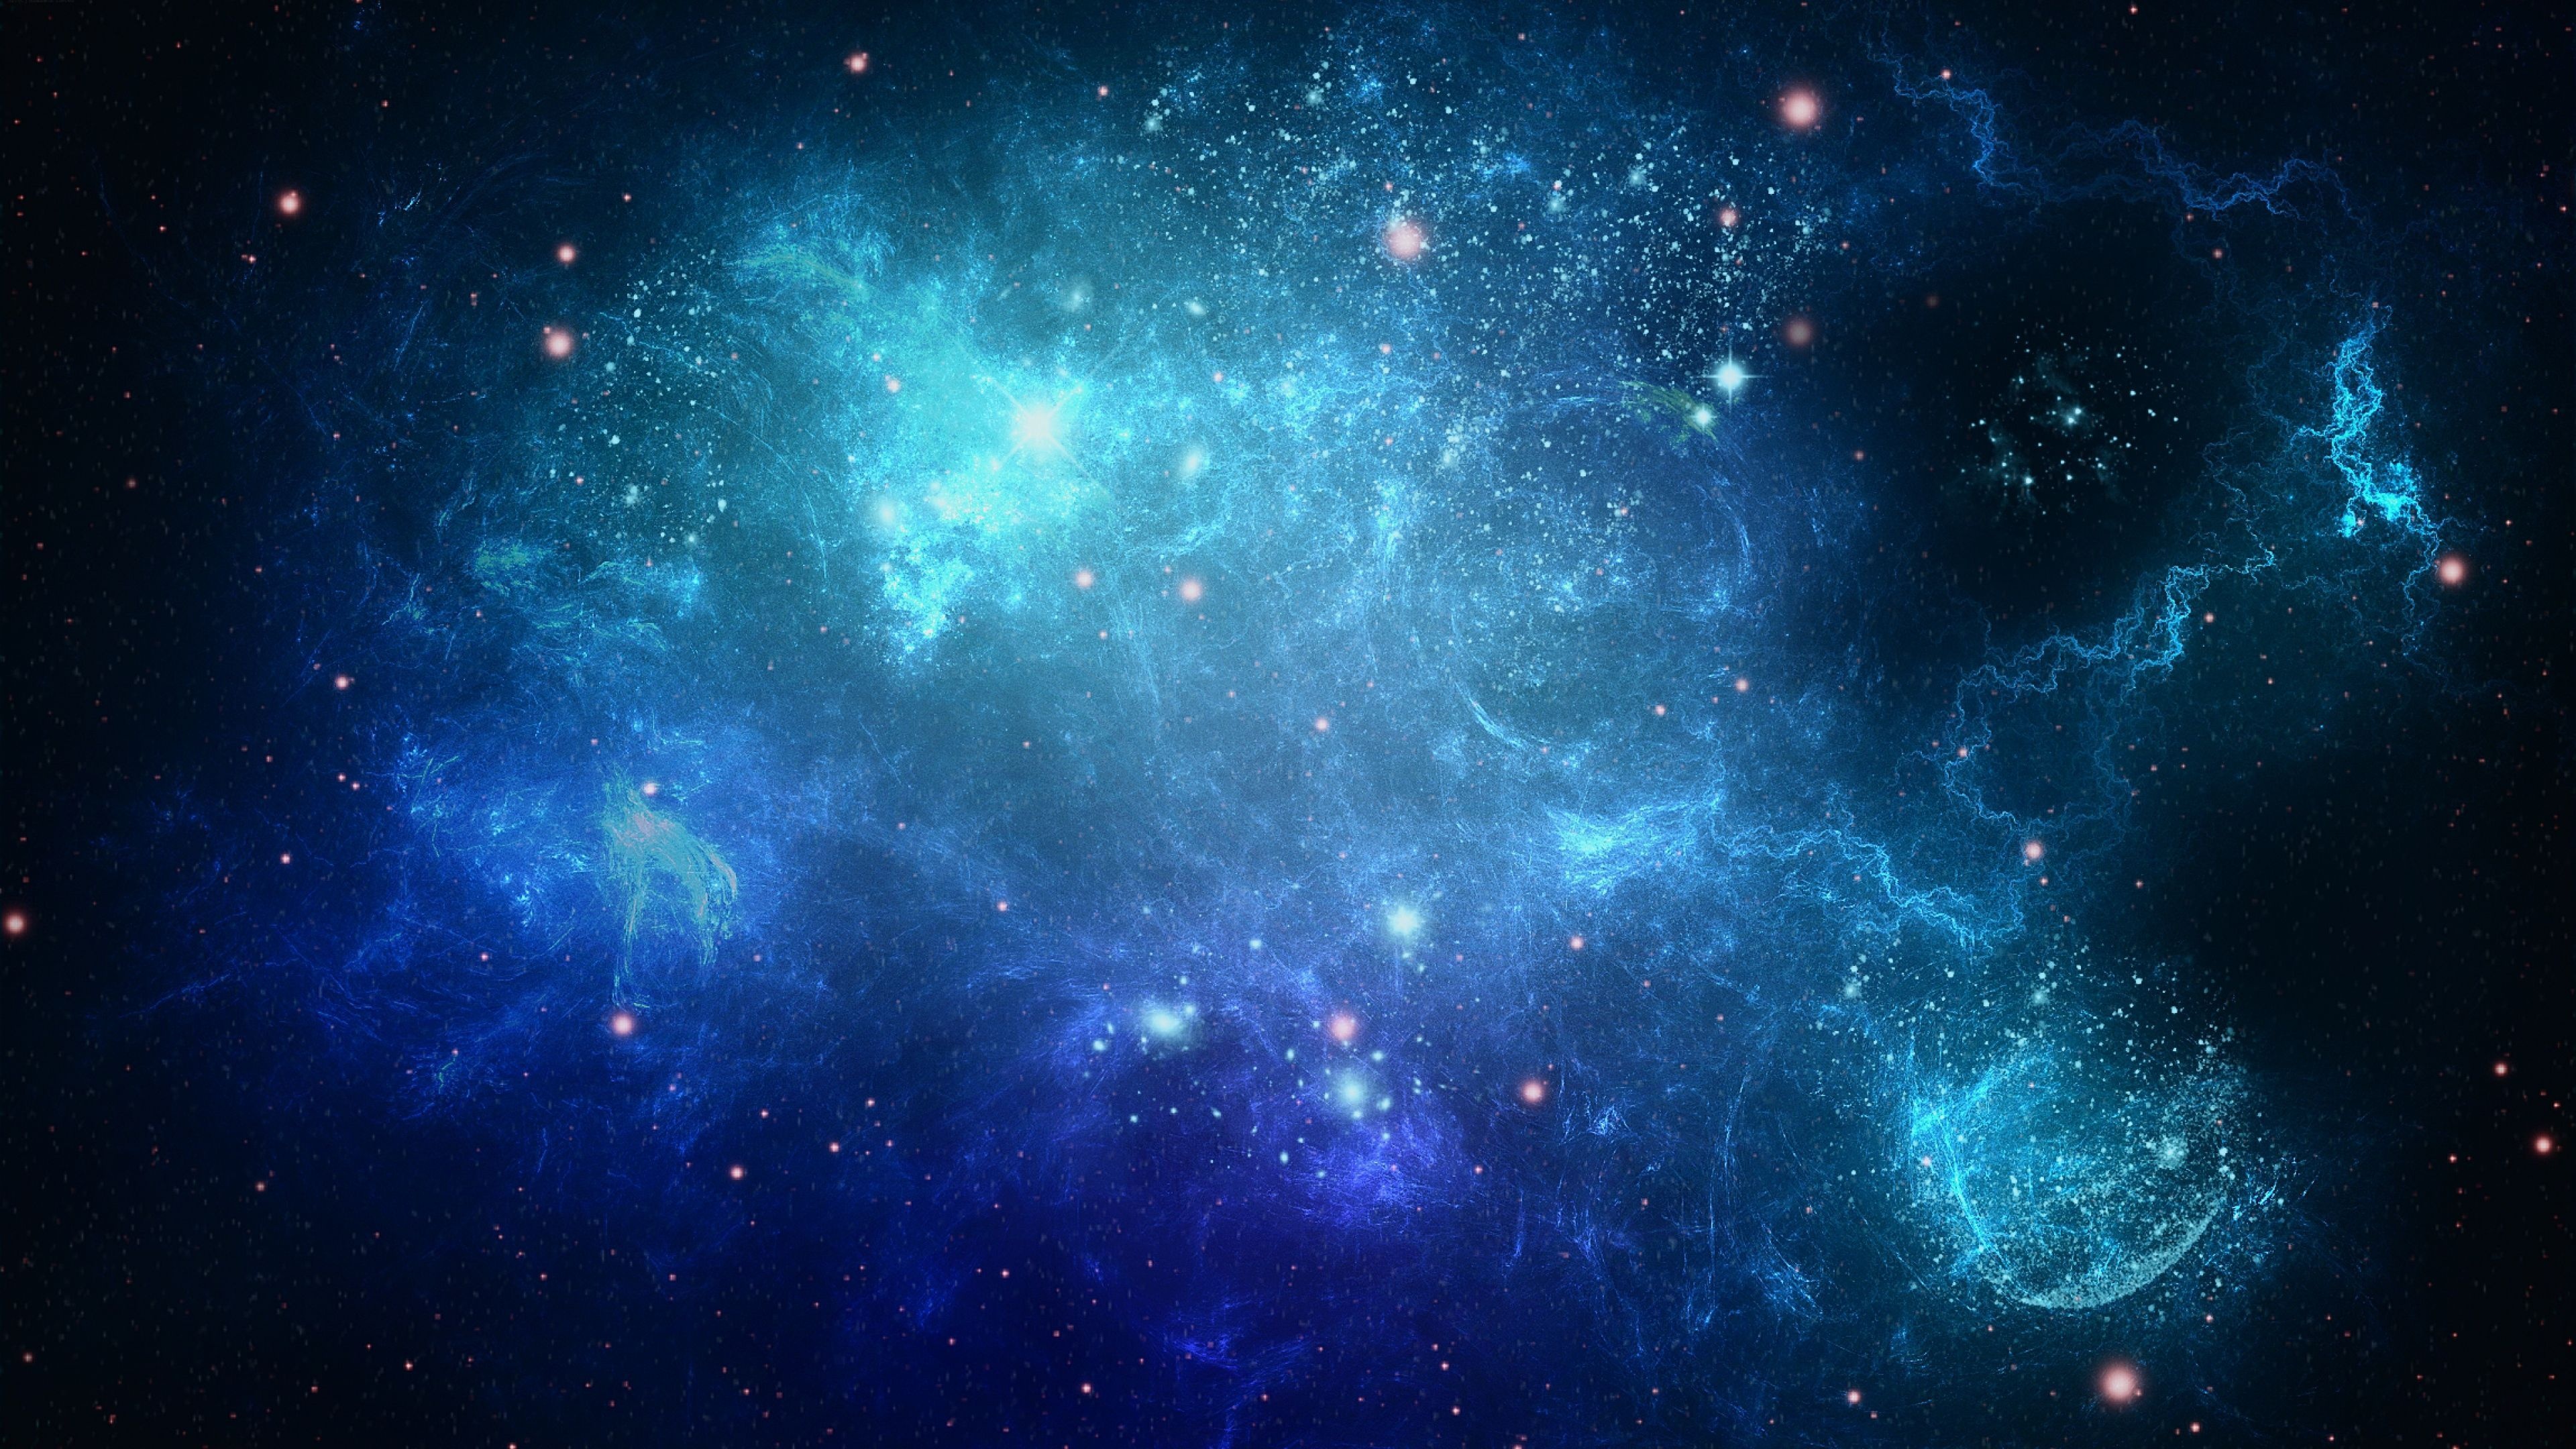 Universe, Dazzling space backgrounds, Enigmatic cosmos, Astral beauty, 3840x2160 4K Desktop